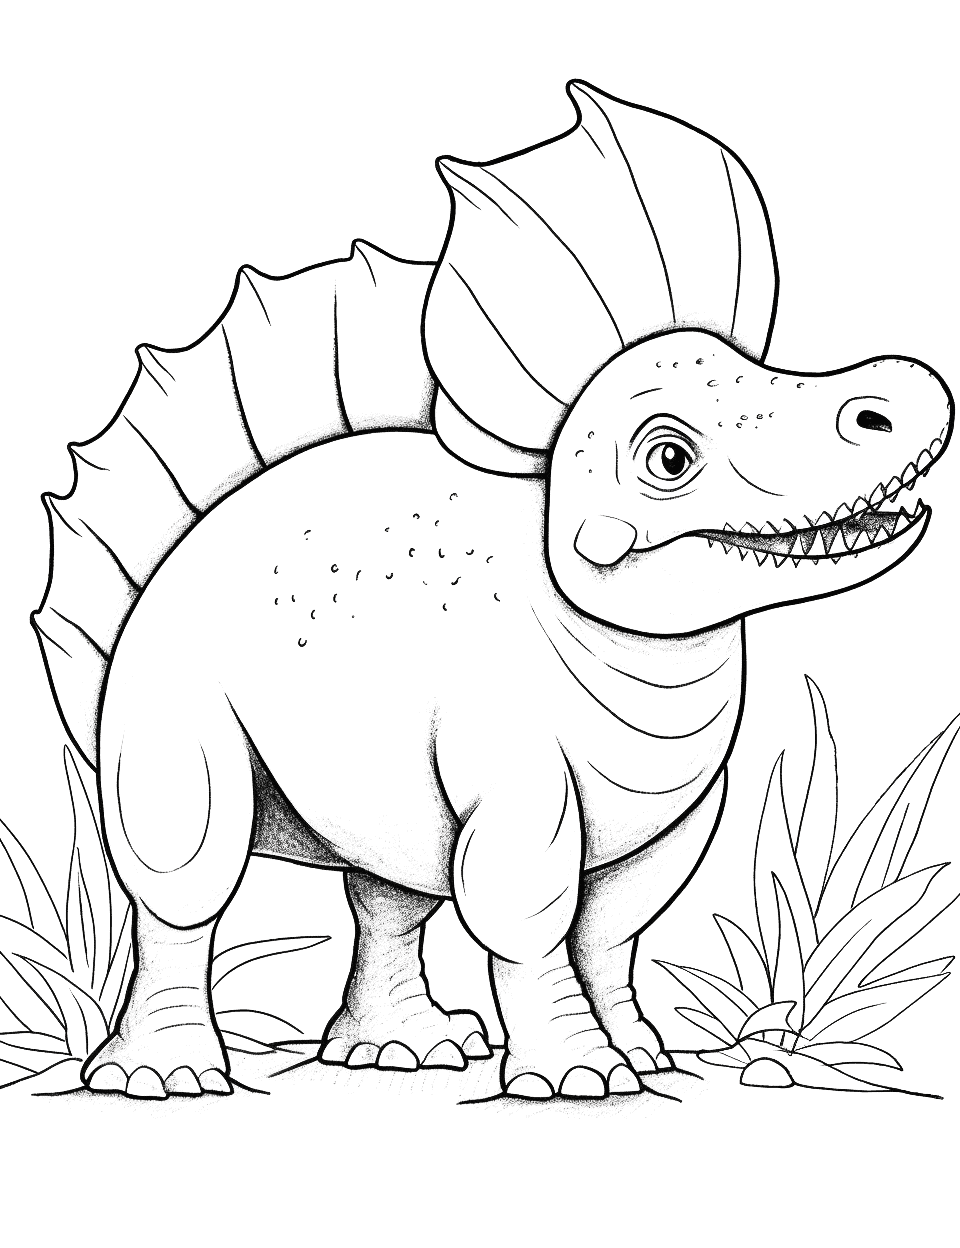 Realistic Triceratops Coloring Page - A realistic and detailed Triceratops for older kids to color.